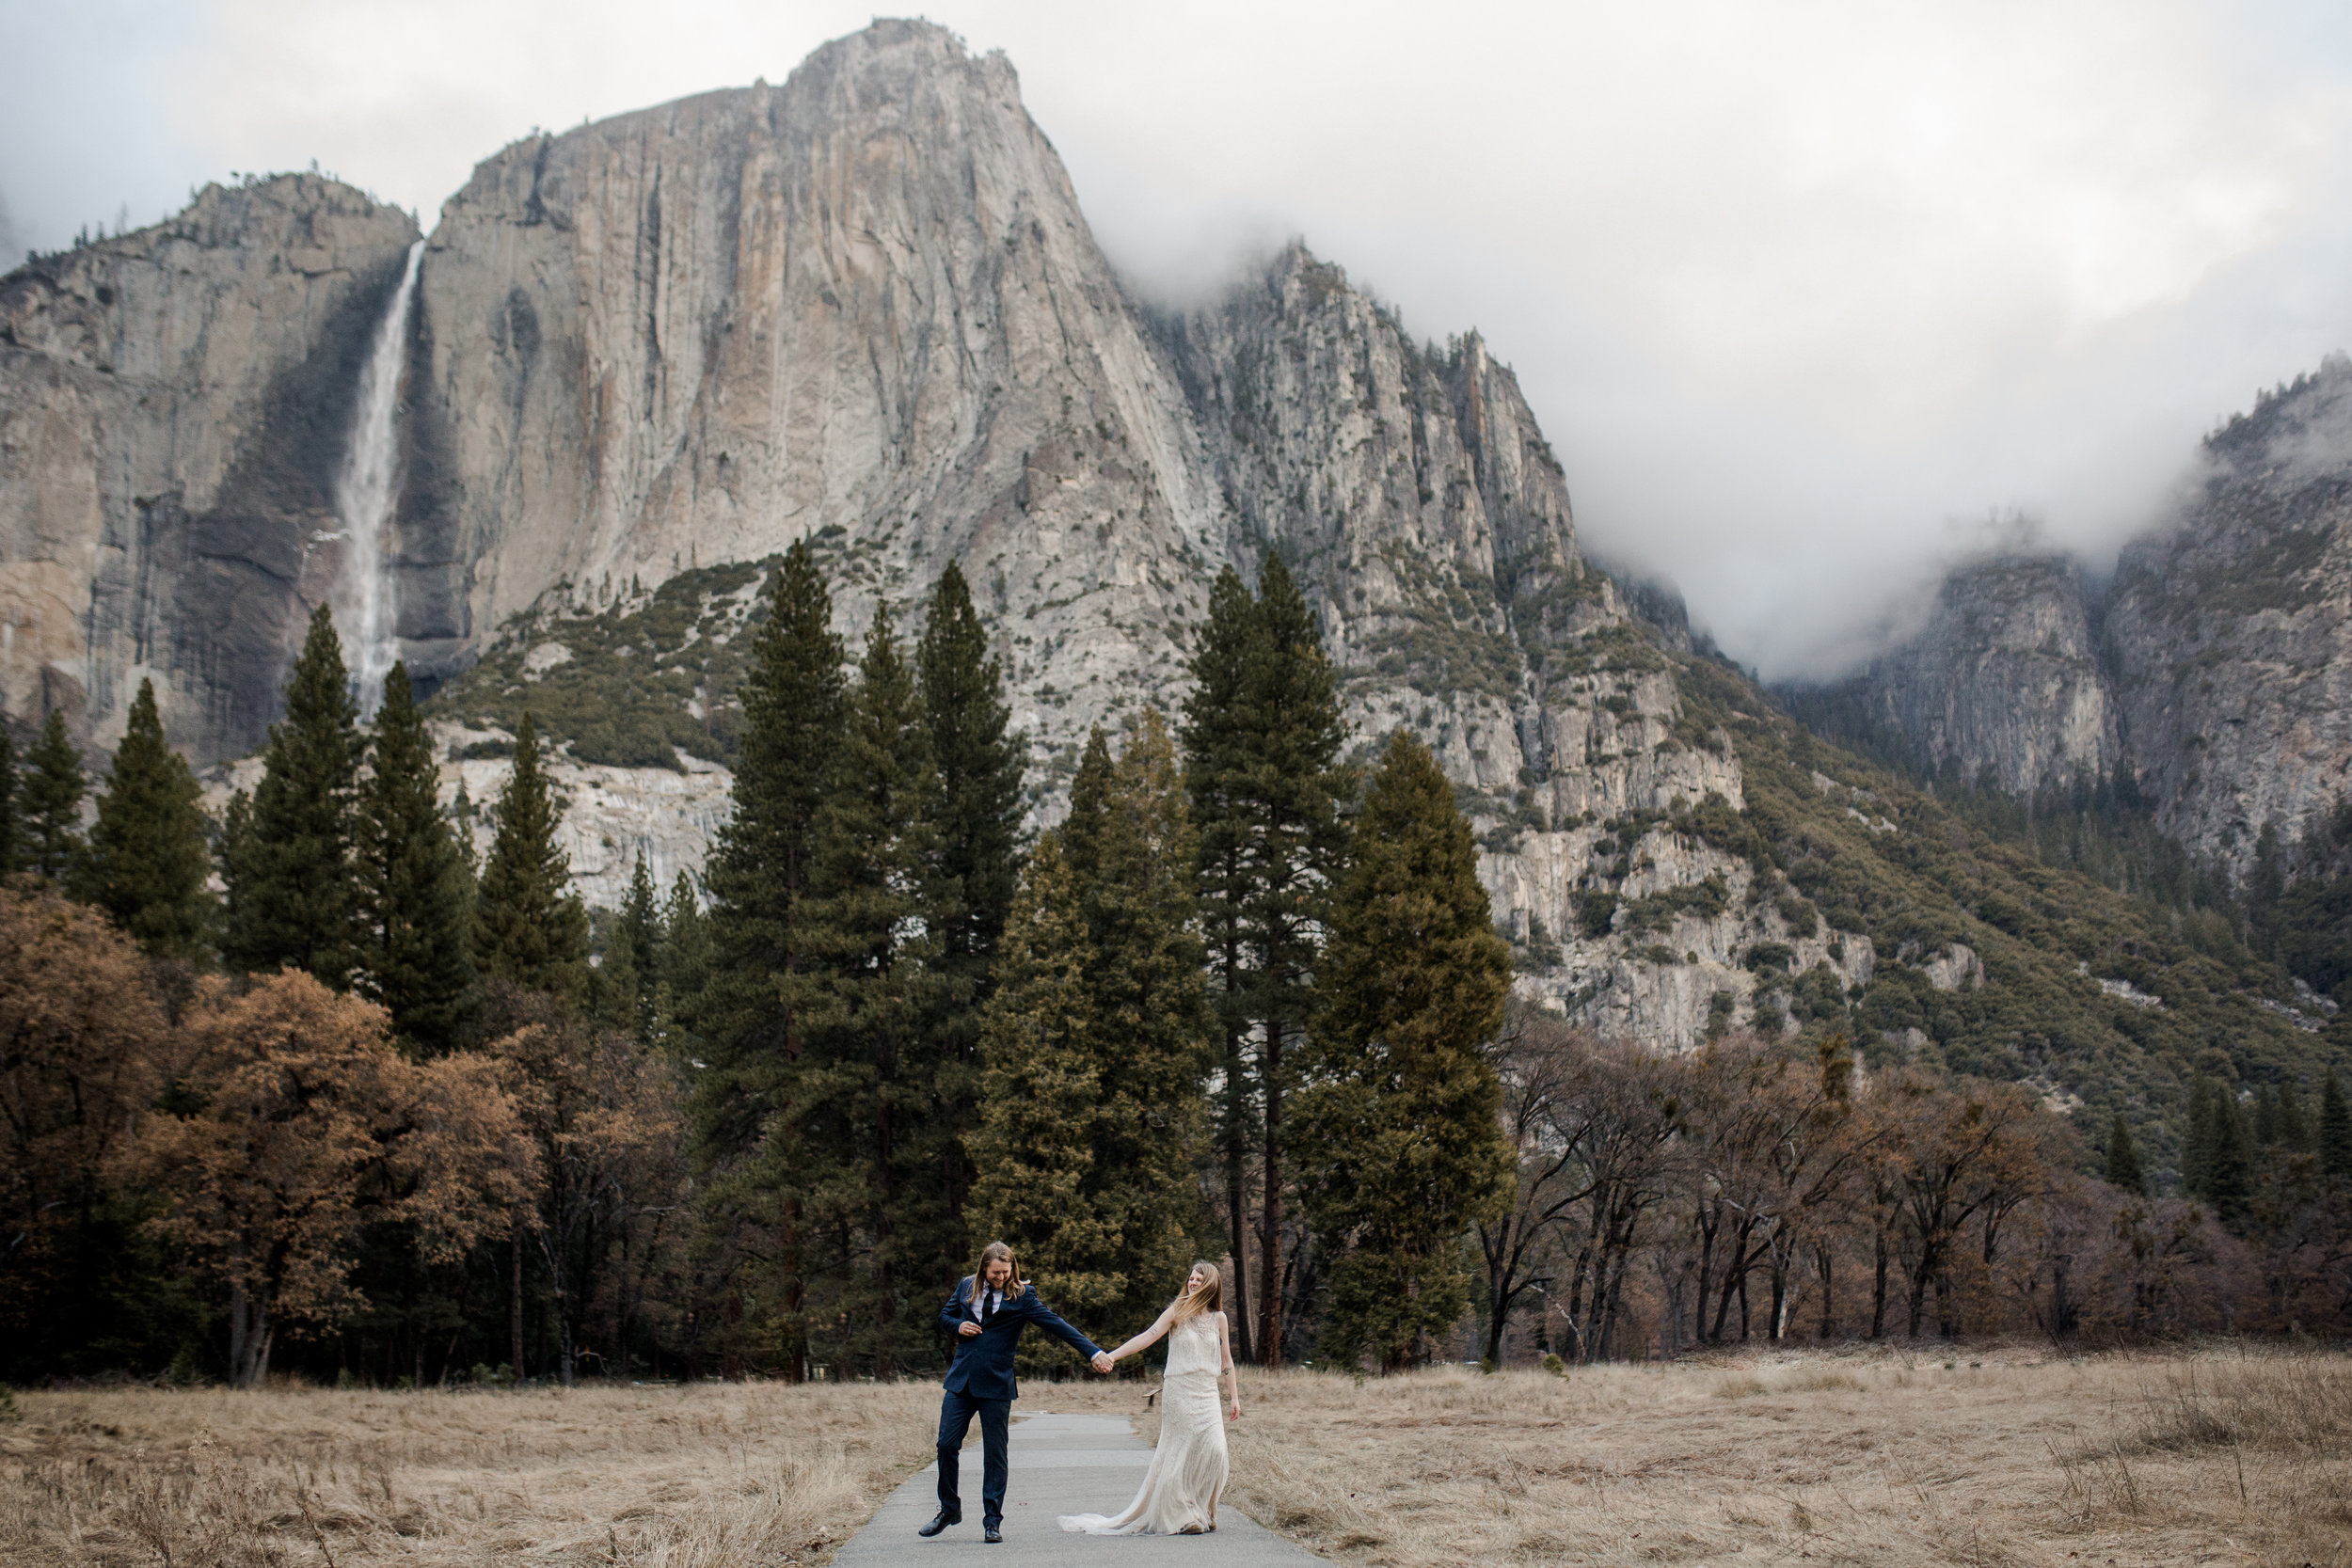 nicole-daacke-photography-yousemite-national-park-elopement-photographer-winter-cloud-moody-elope-inspiration-yosemite-valley-tunnel-view-winter-cloud-fog-weather-wedding-photos-25.jpg